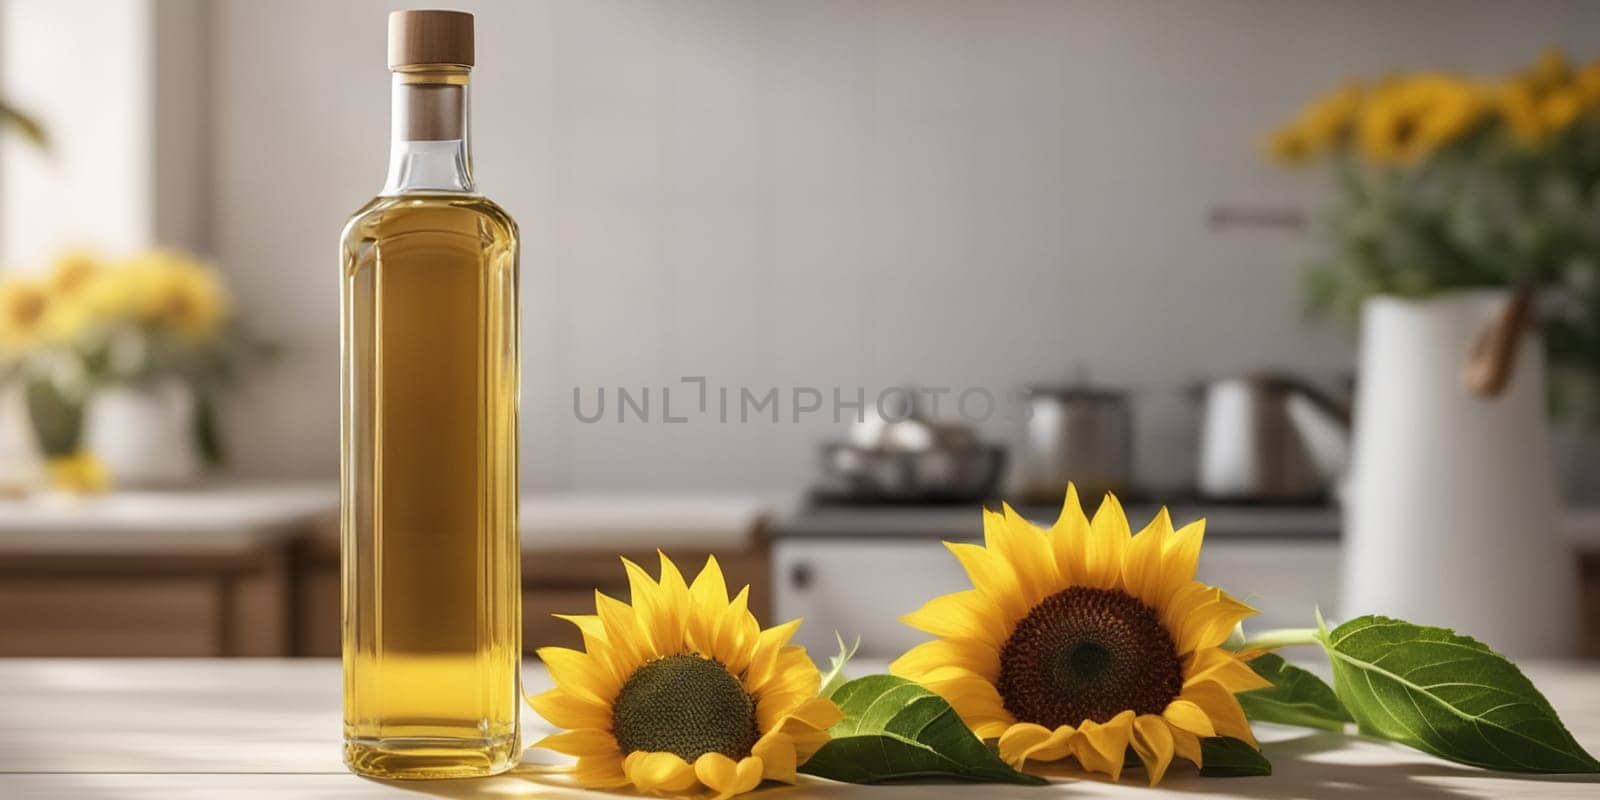 Bottle of sunflower oil in the white light kitchen with wooden facades and appliances